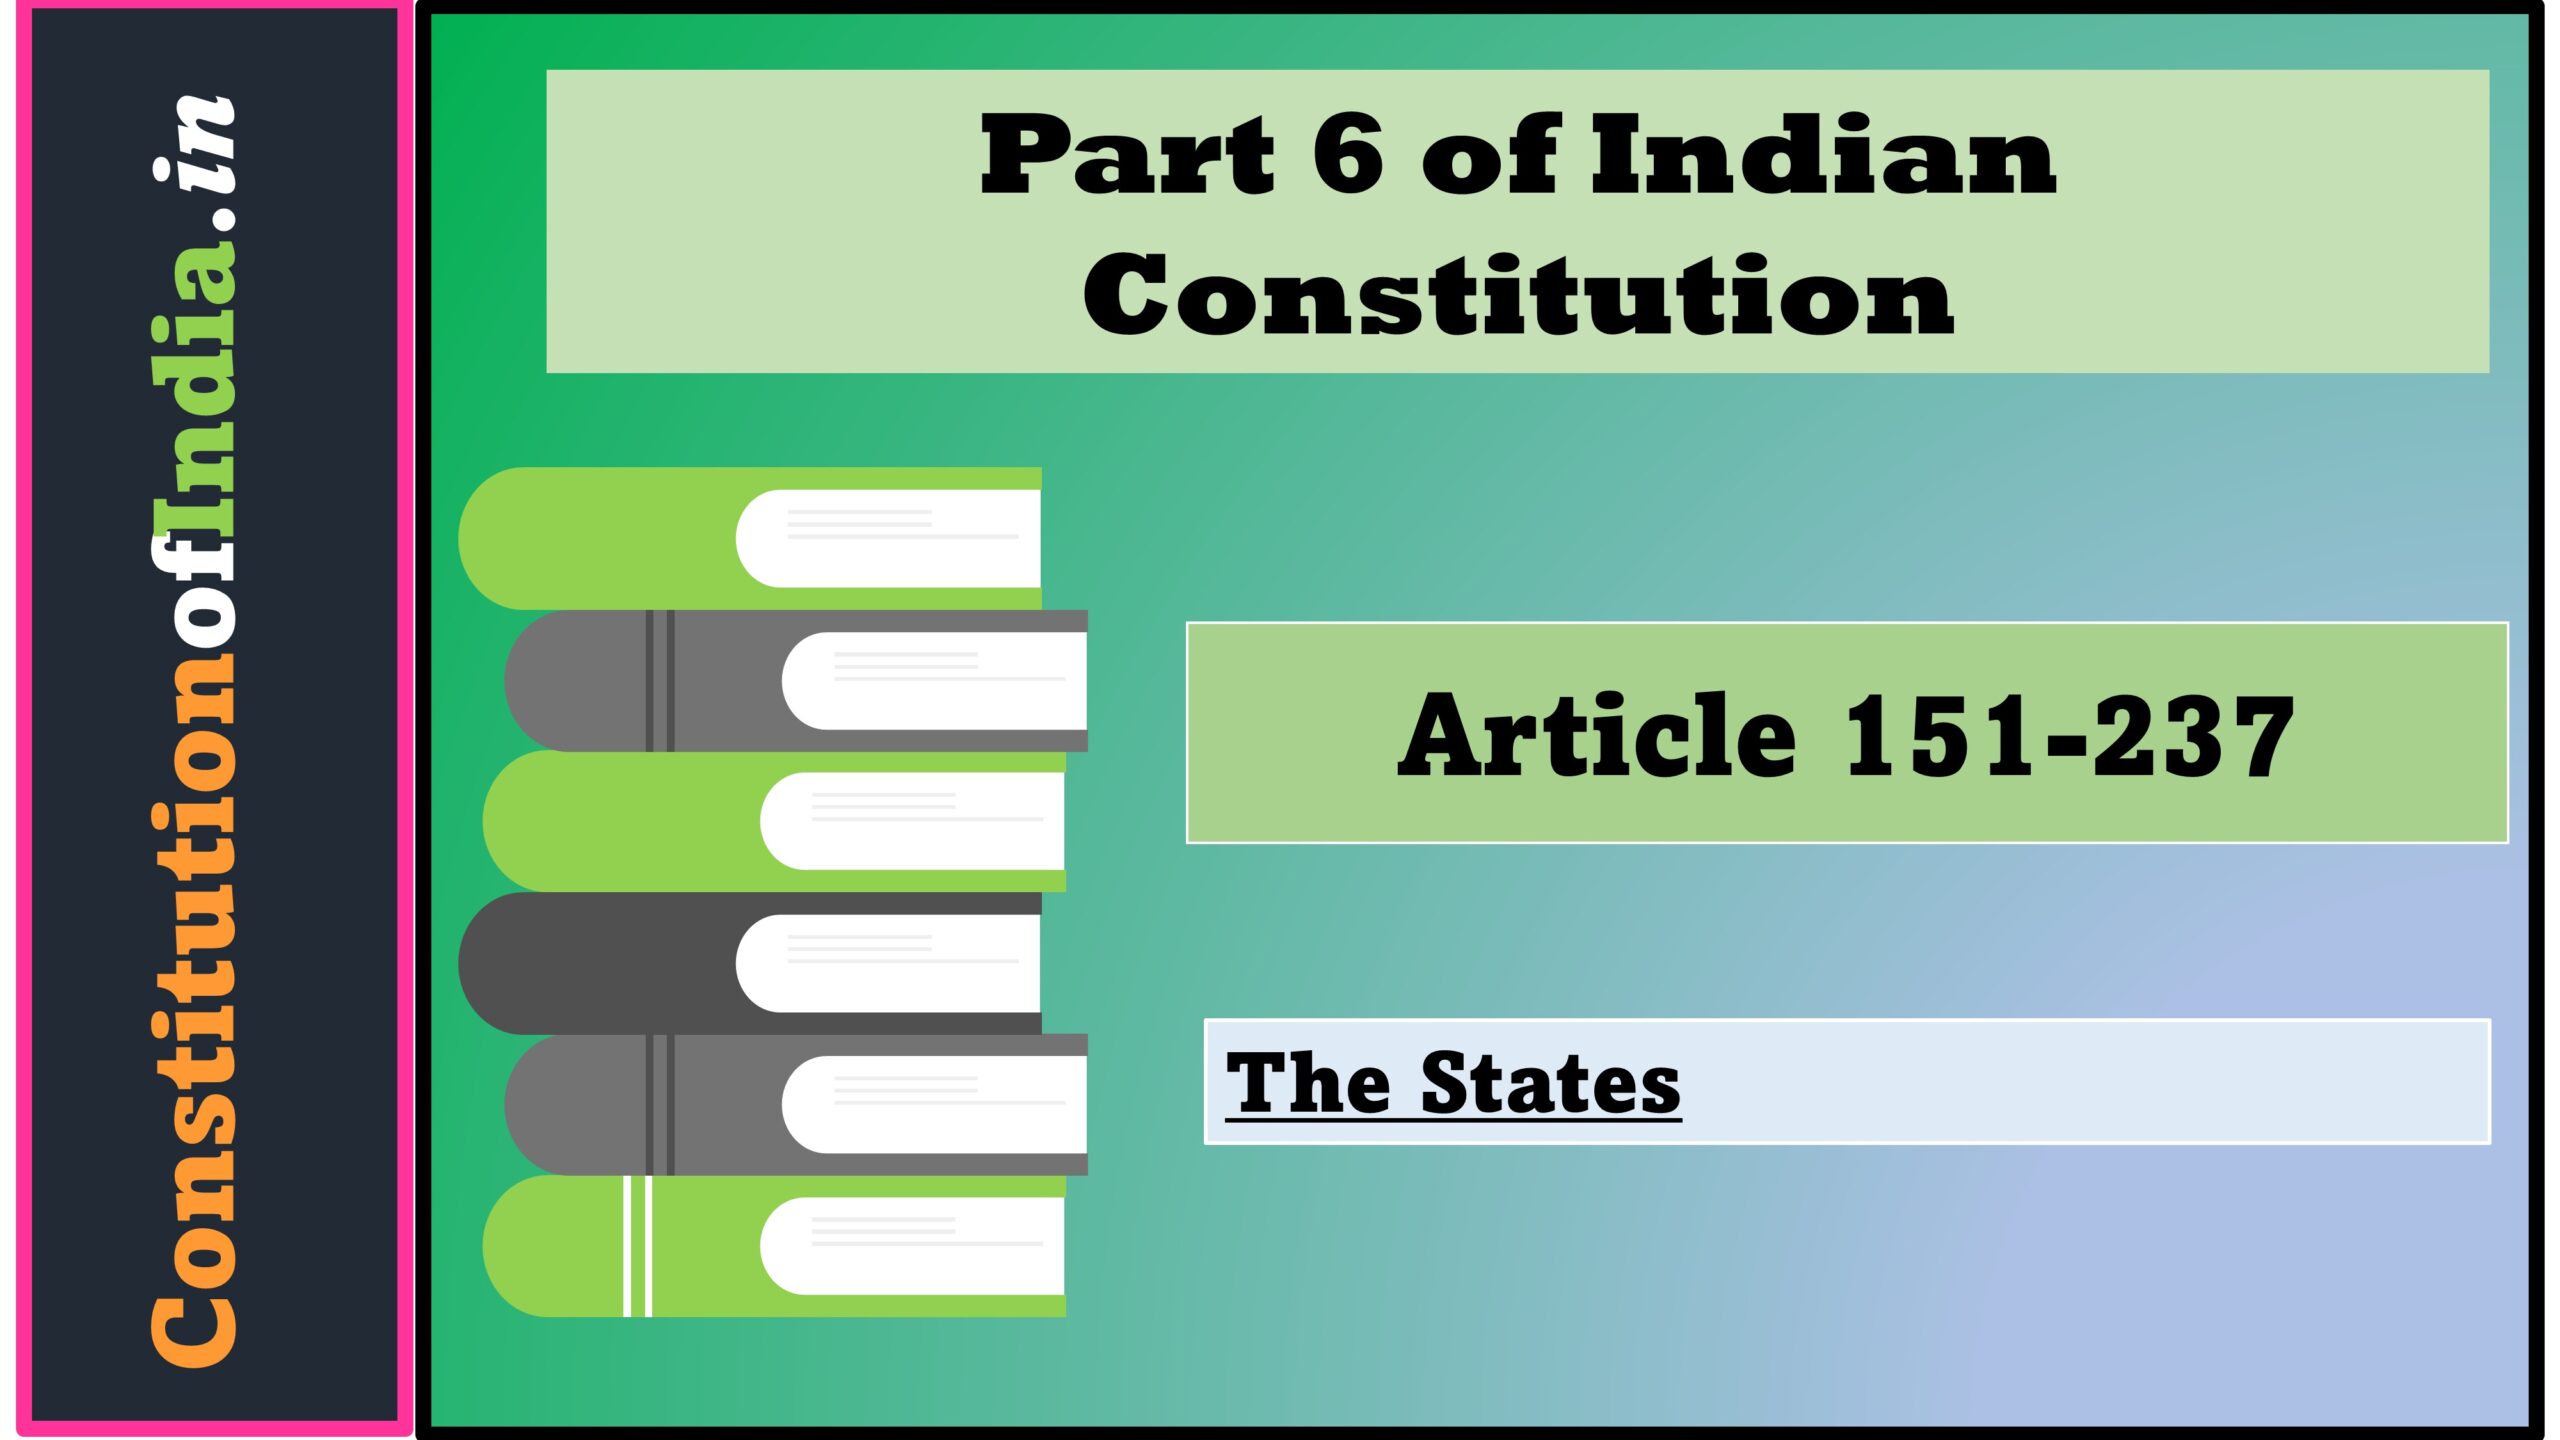 Part 6 of Indian Constitution